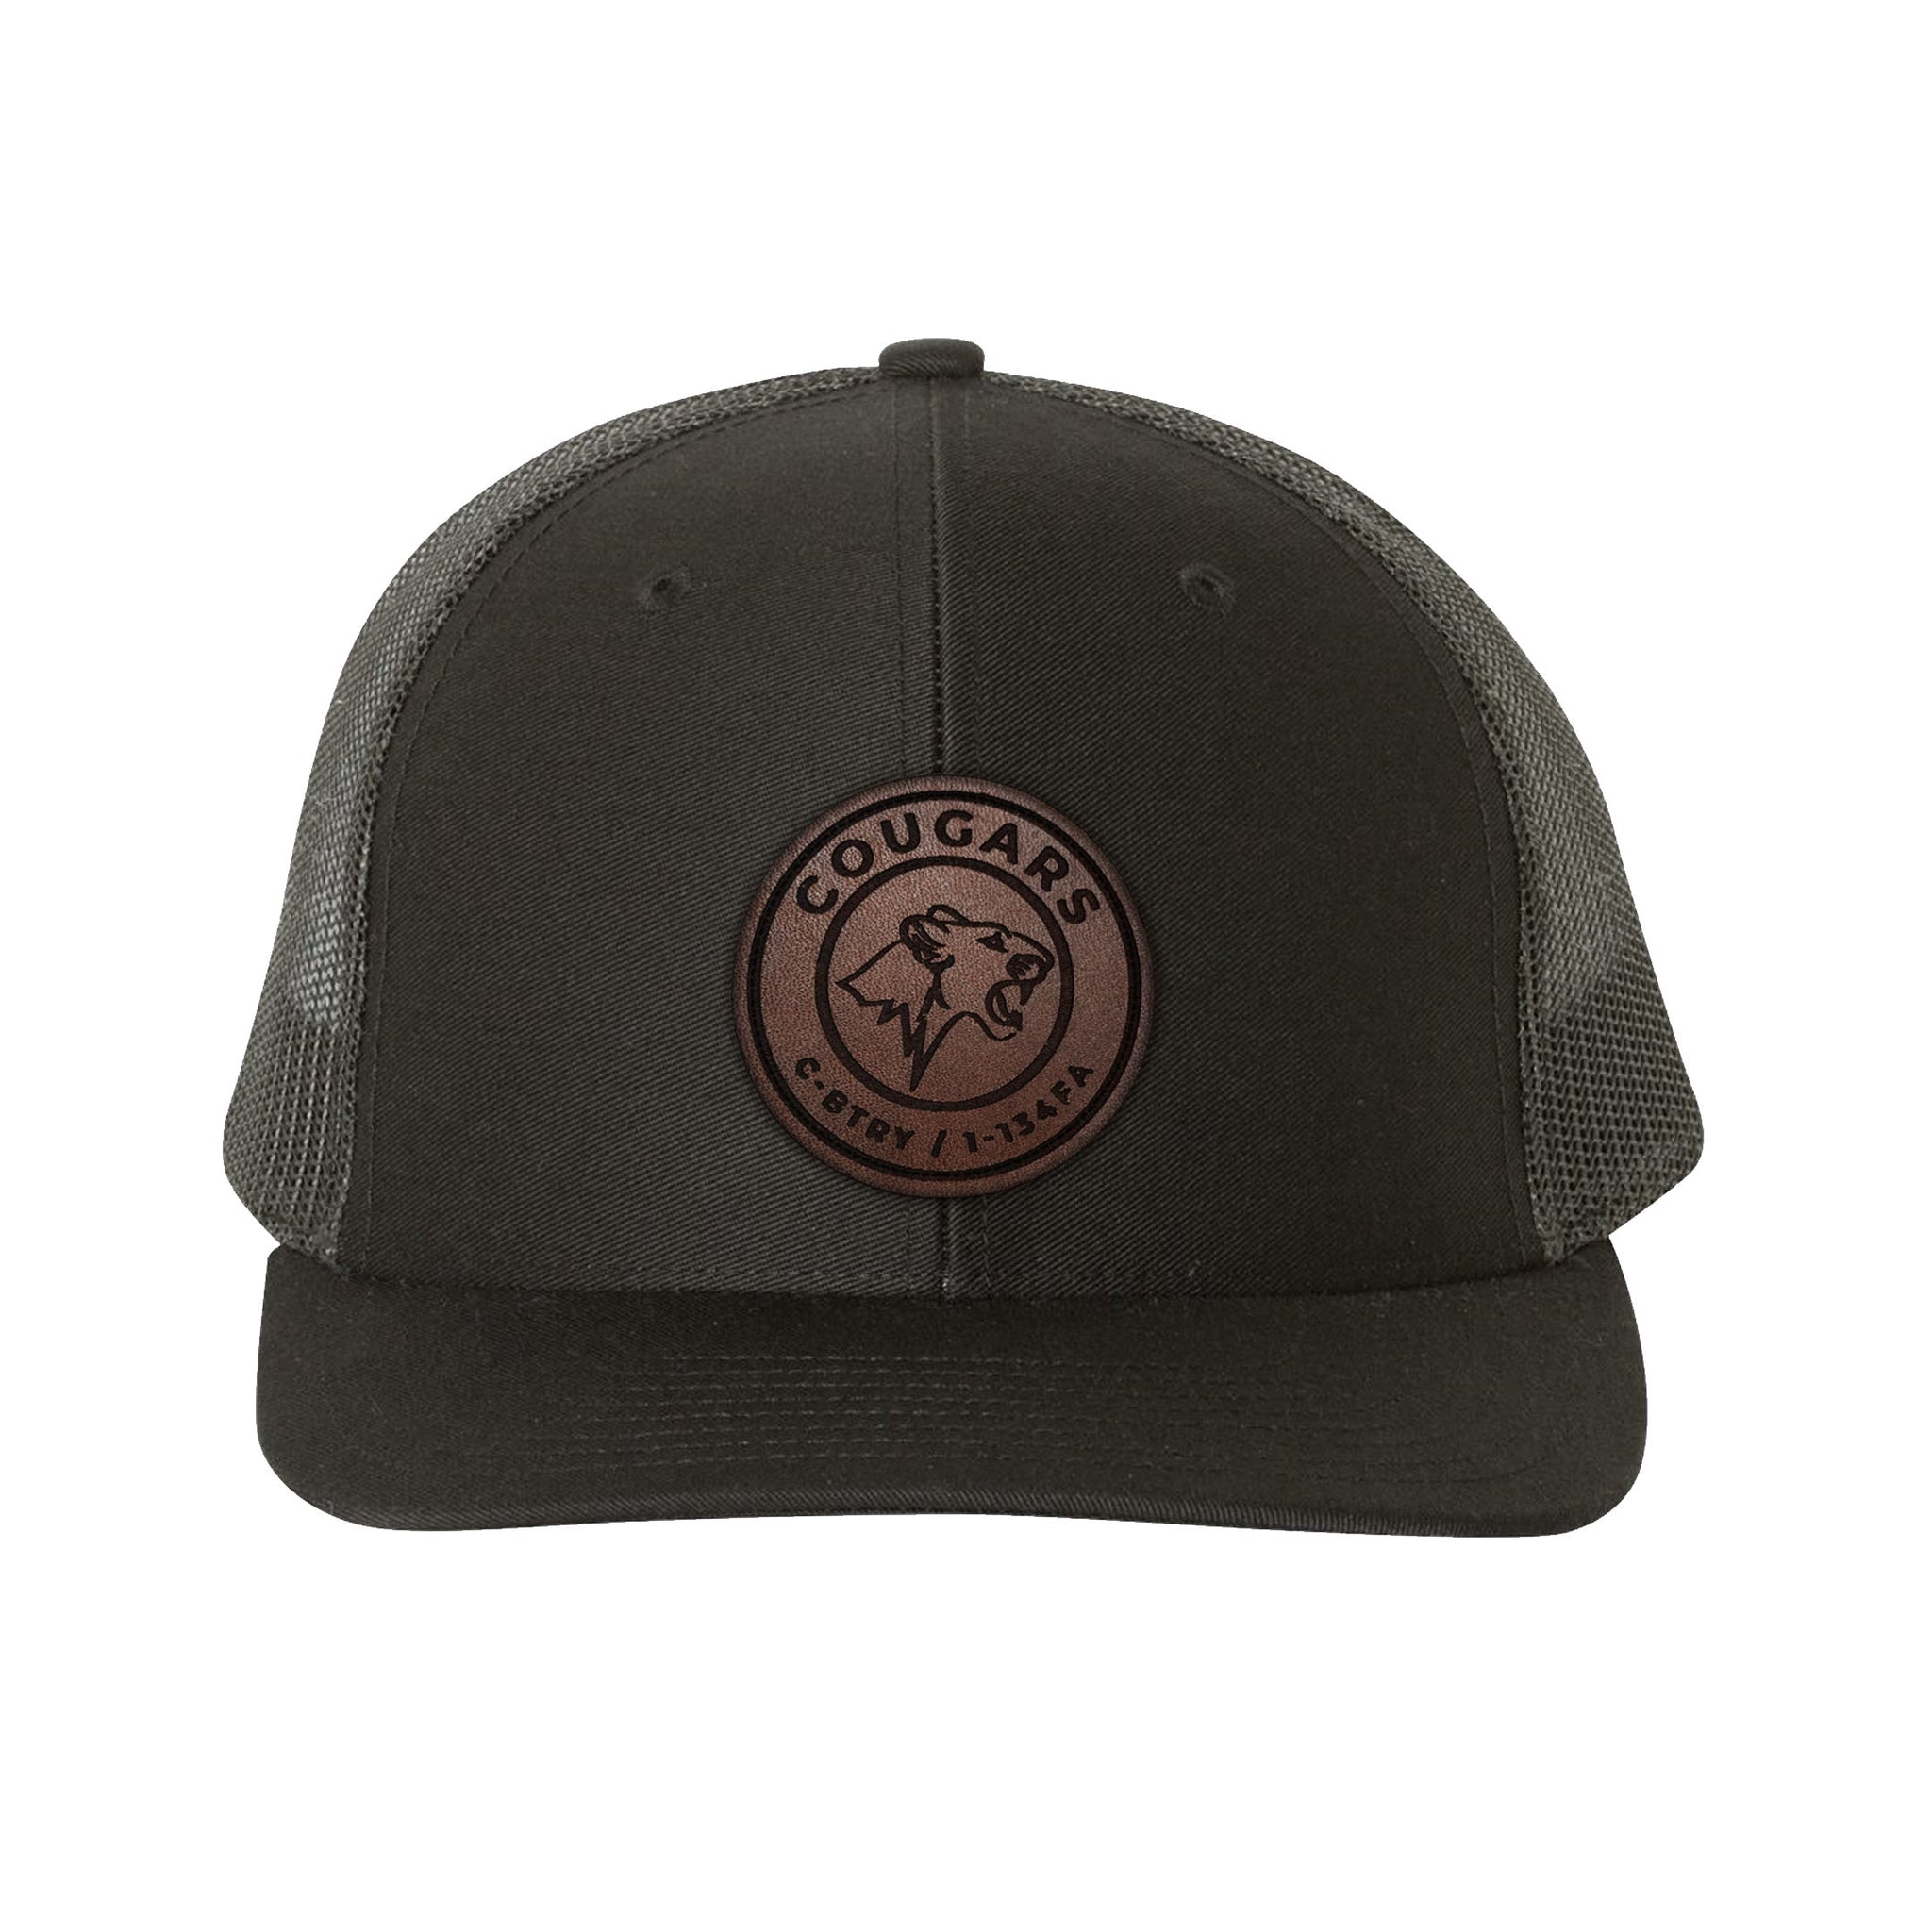 C Battery Cougars Leather Snap-Back